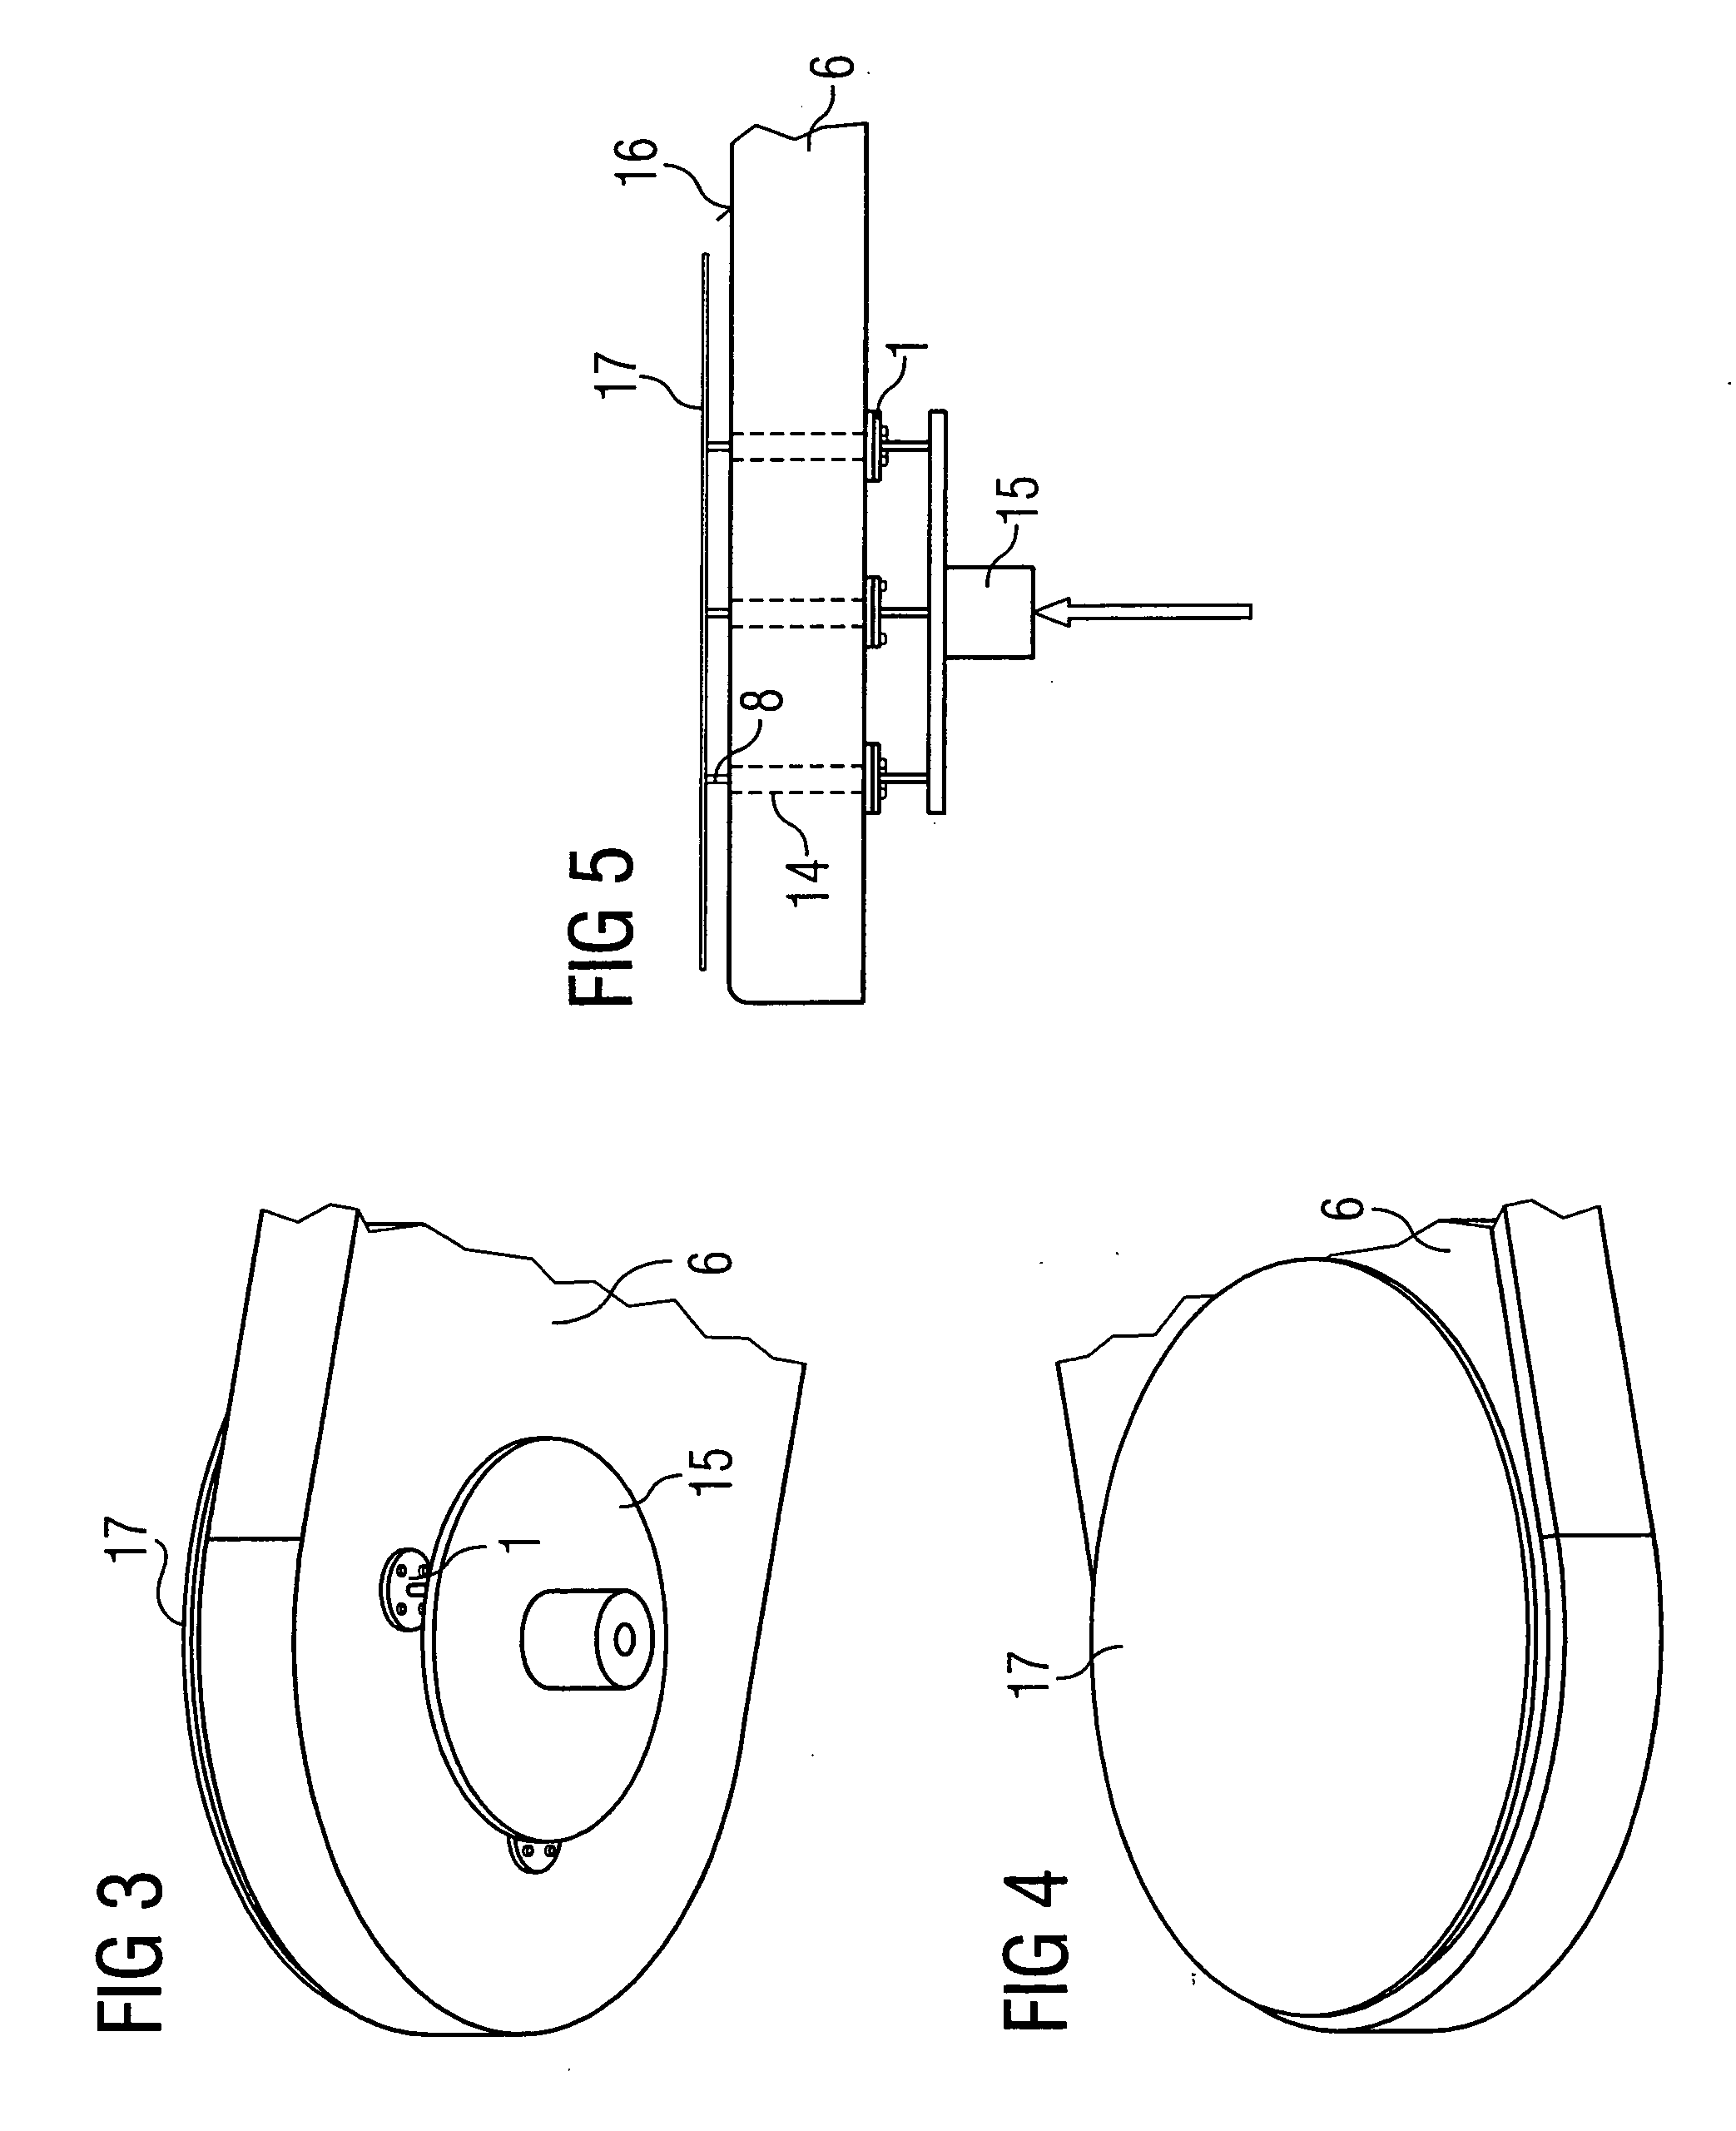 Wafer lifting device